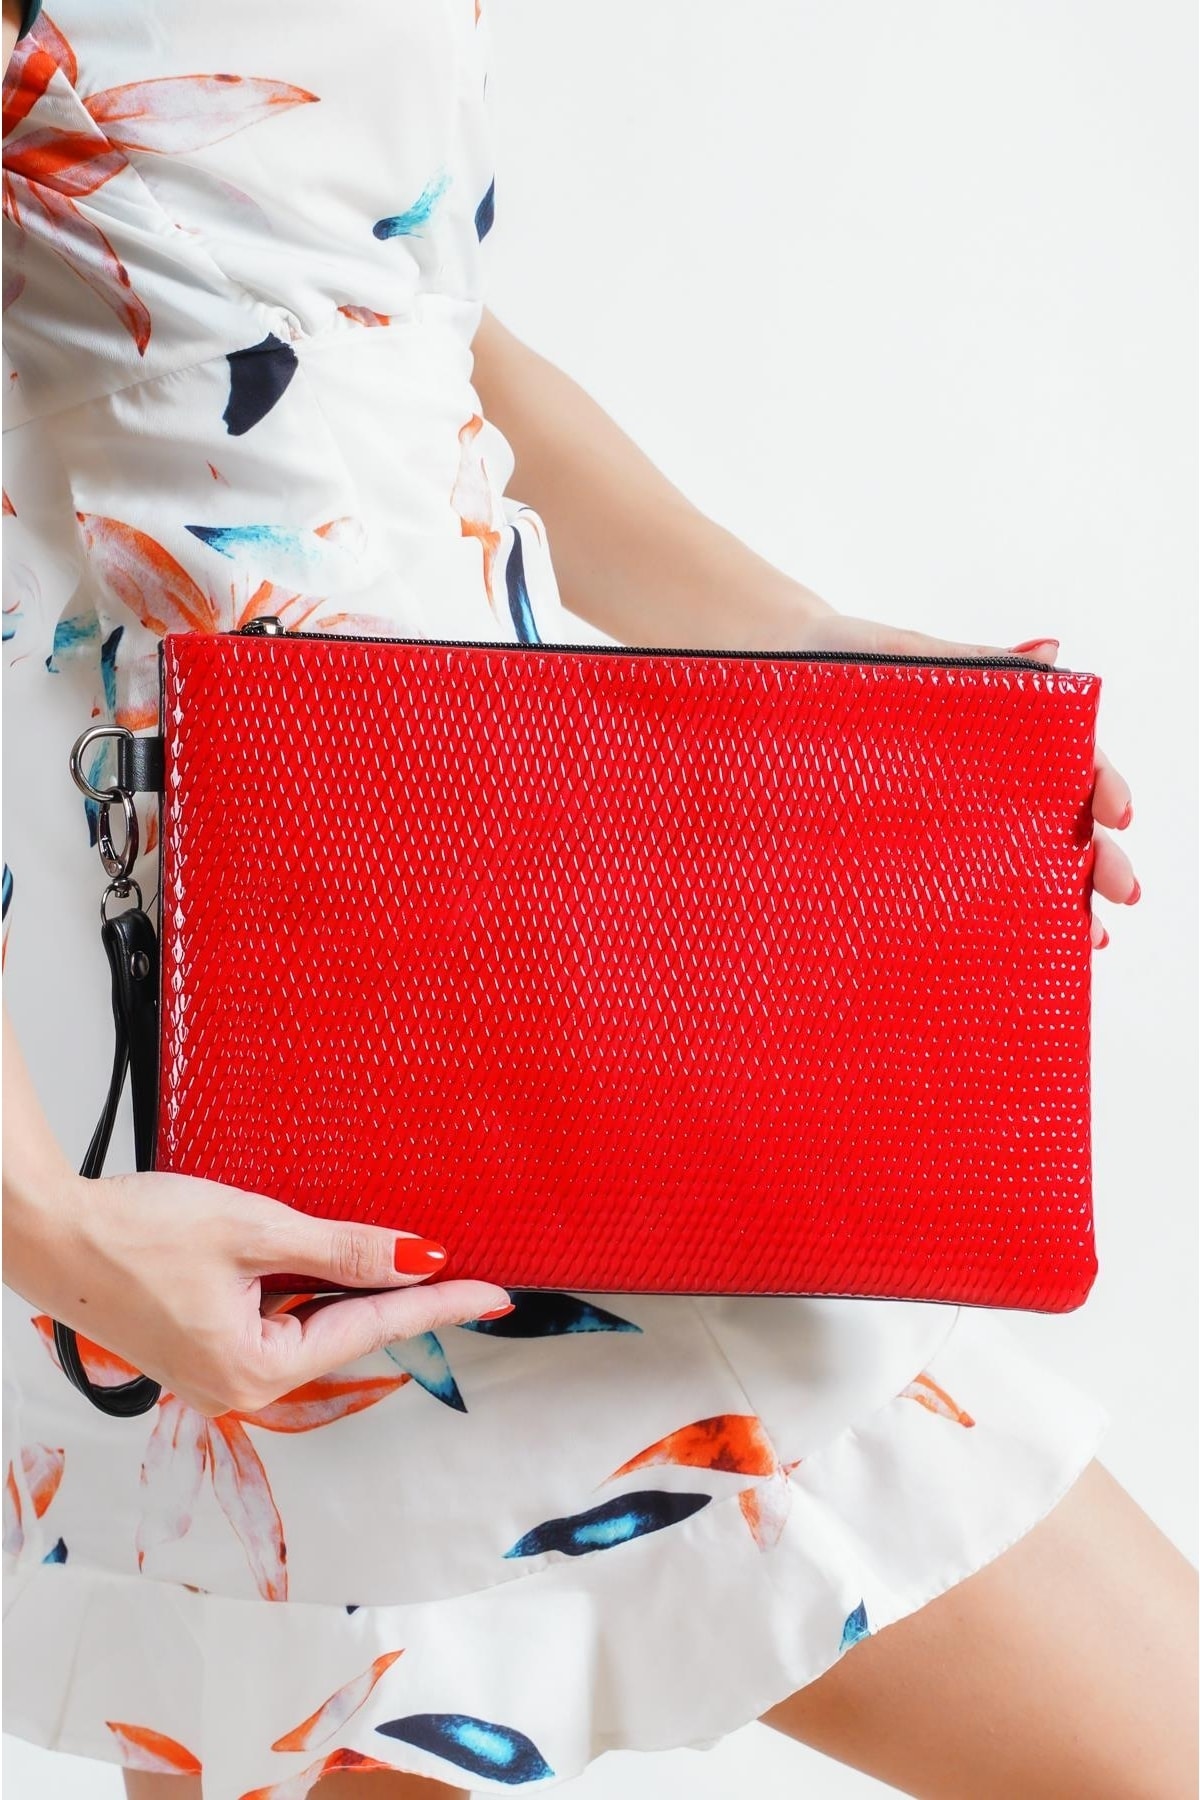 Capone Outfitters Capone Patent Leather Snake Pattern Paris Red Women's Clutch Bag